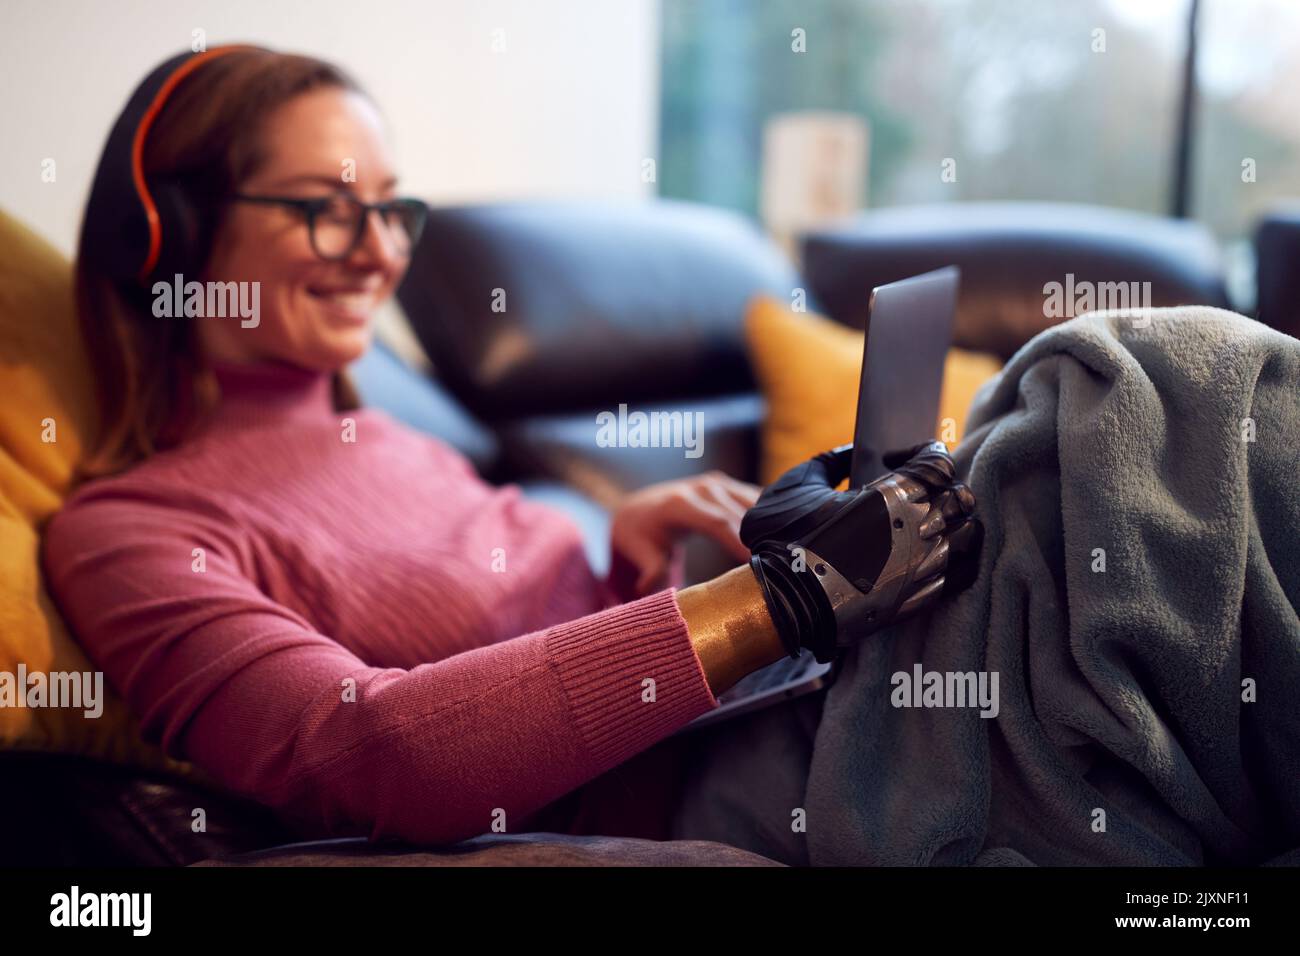 Woman With Prosthetic Arm Wearing Wireless Headphones And Working On Laptop On Sofa At Home Stock Photo